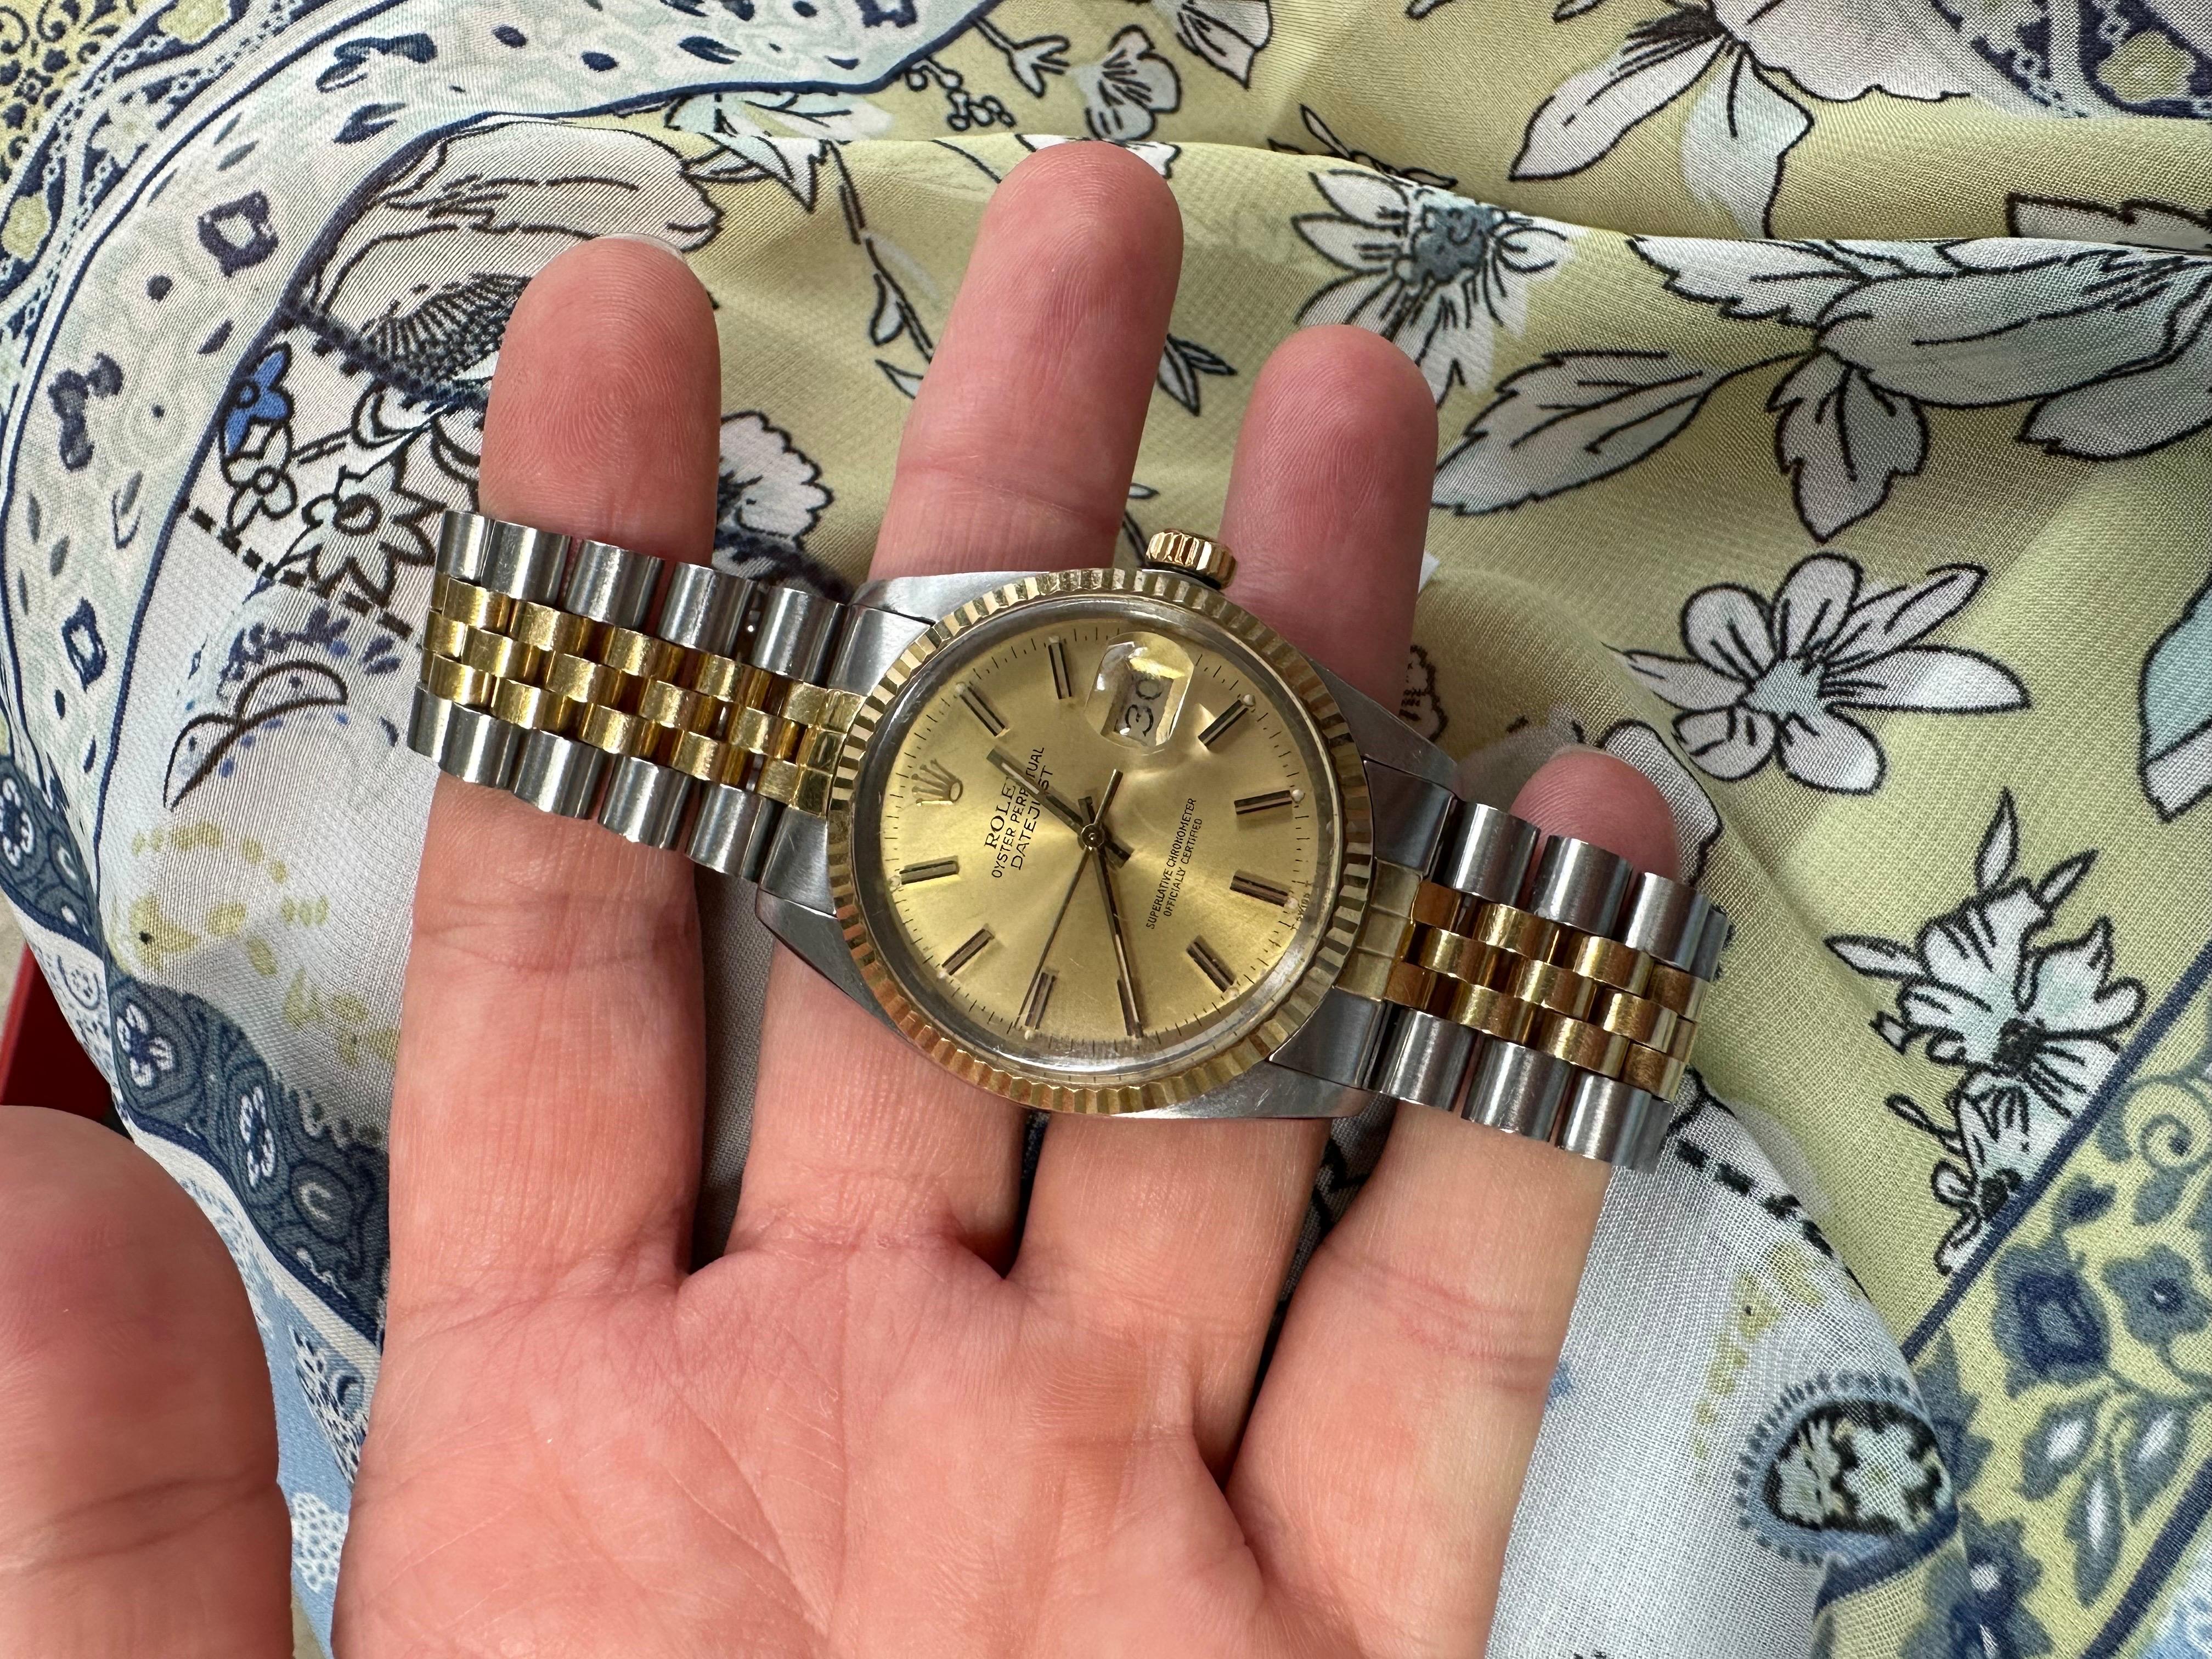 Rolex stainless steel and 18kt yellow gold.Model 16013/747794 No box or papers

Item#: 500-00009 EATT

WHAT YOU GET AT STAMPAR JEWELERS:
Stampar Jewelers, located in the heart of Jupiter, Florida, is a custom jewelry store and studio dedicated to